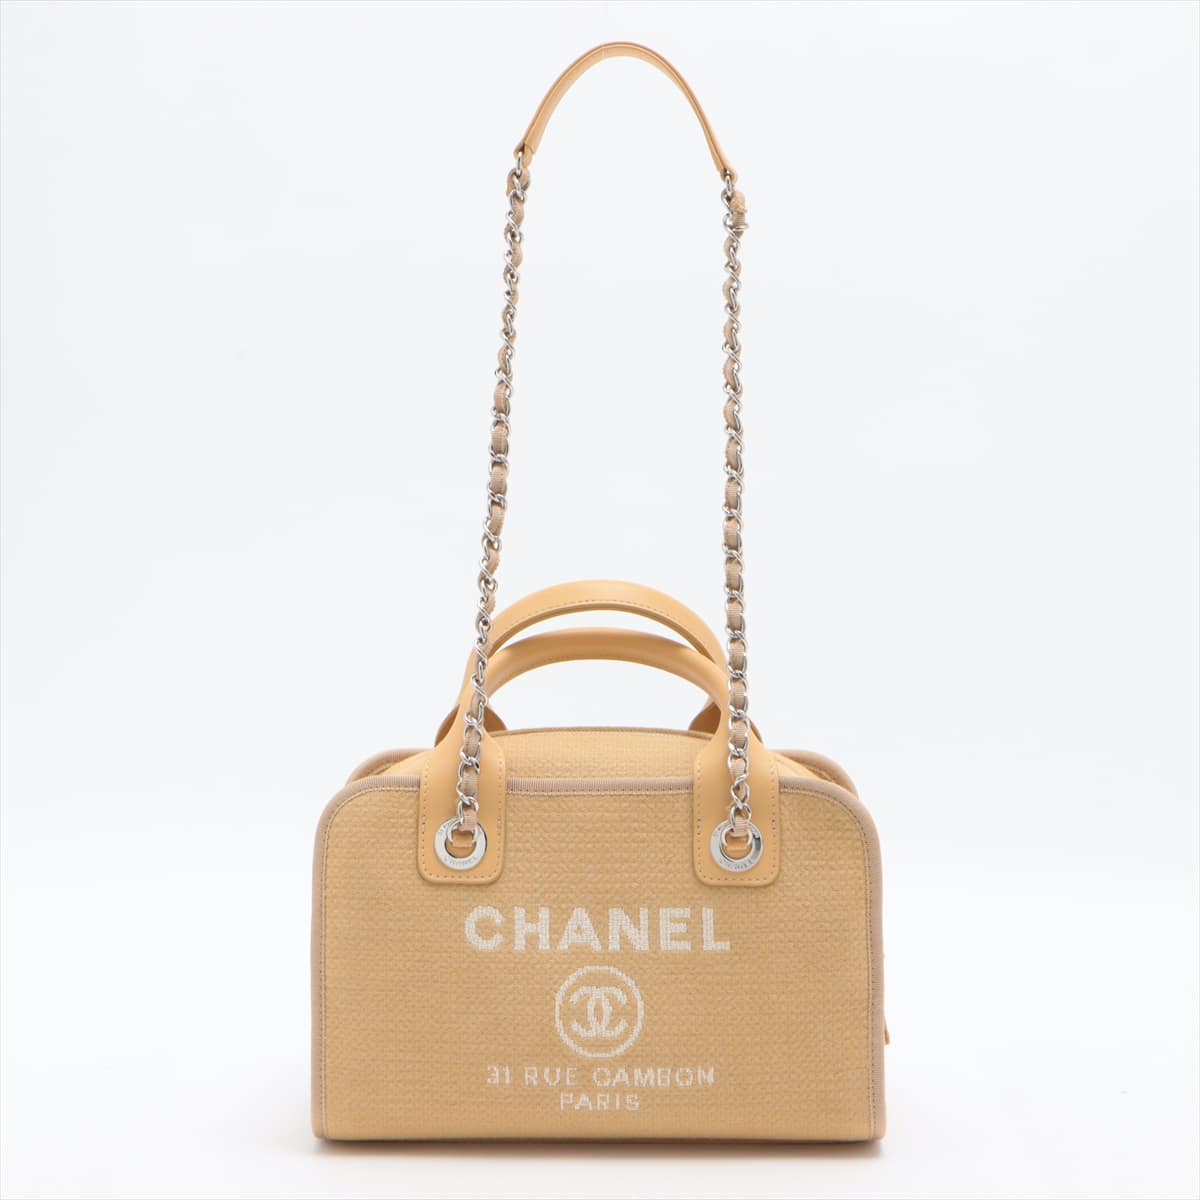 Chanel Deauville canvas 2way handbag Bowling bag Beige Silver Metal fittings There is an IC chip